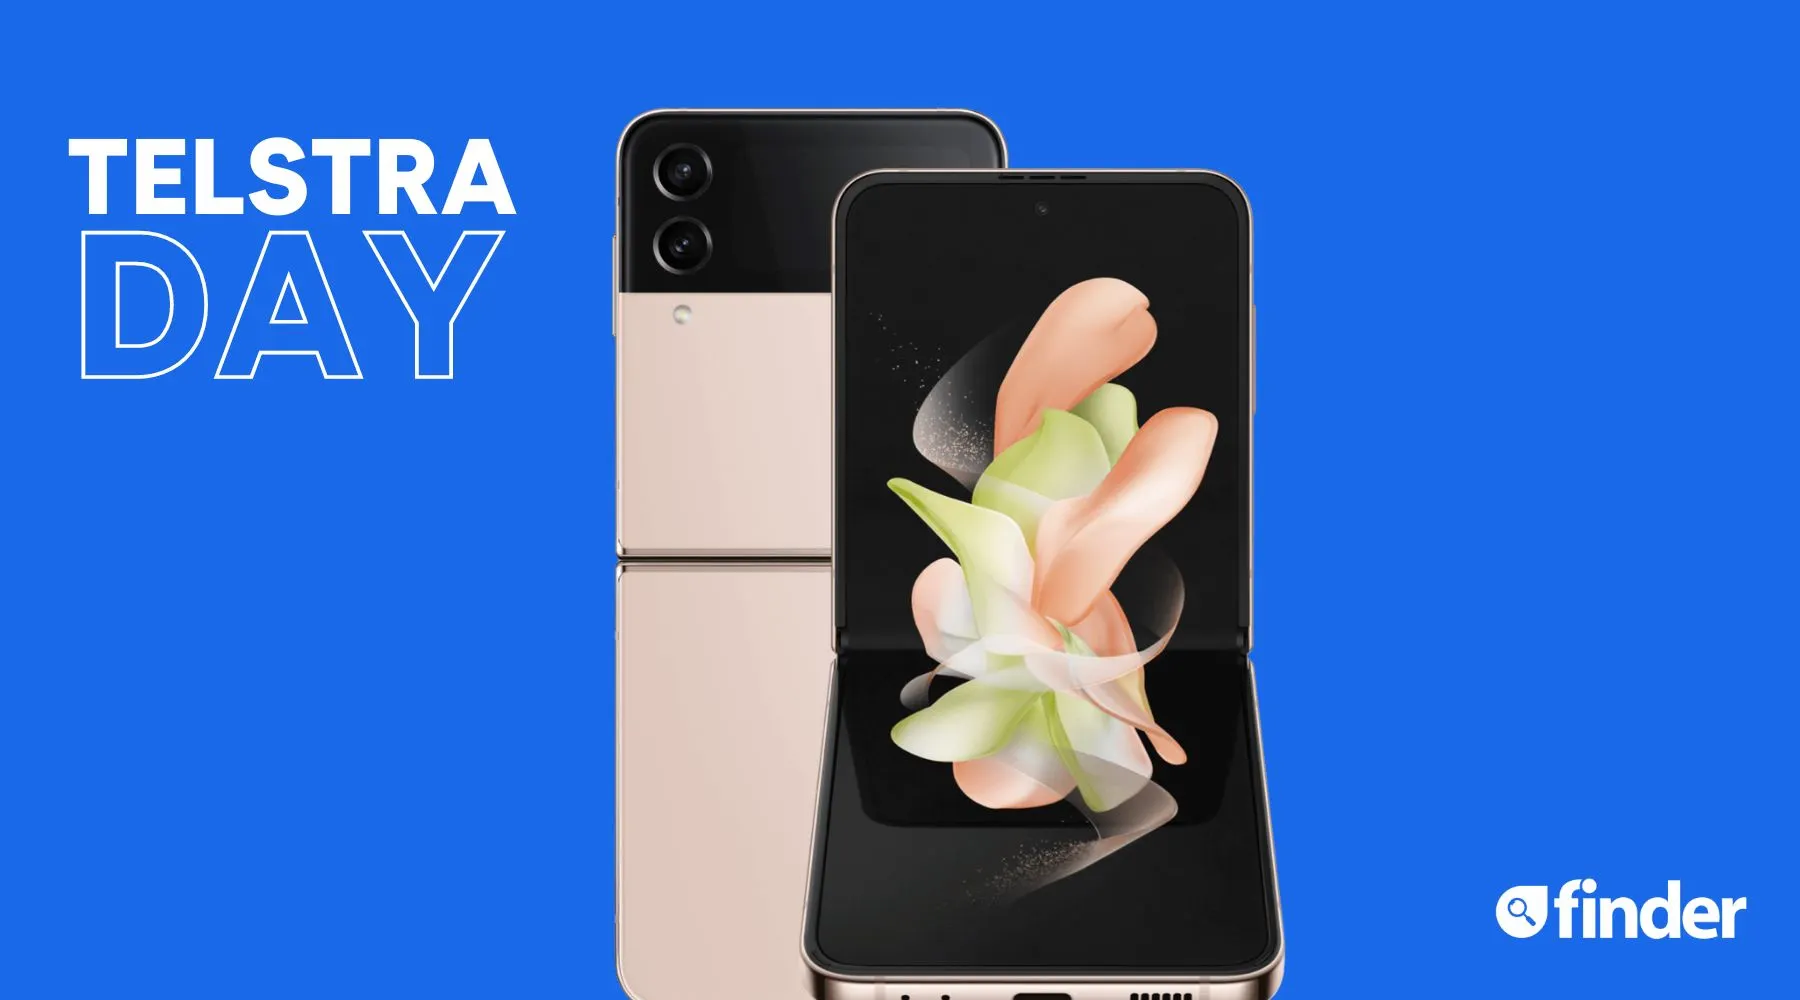 Telstra Day: Less than 24 hours to save $400 on Samsung phones